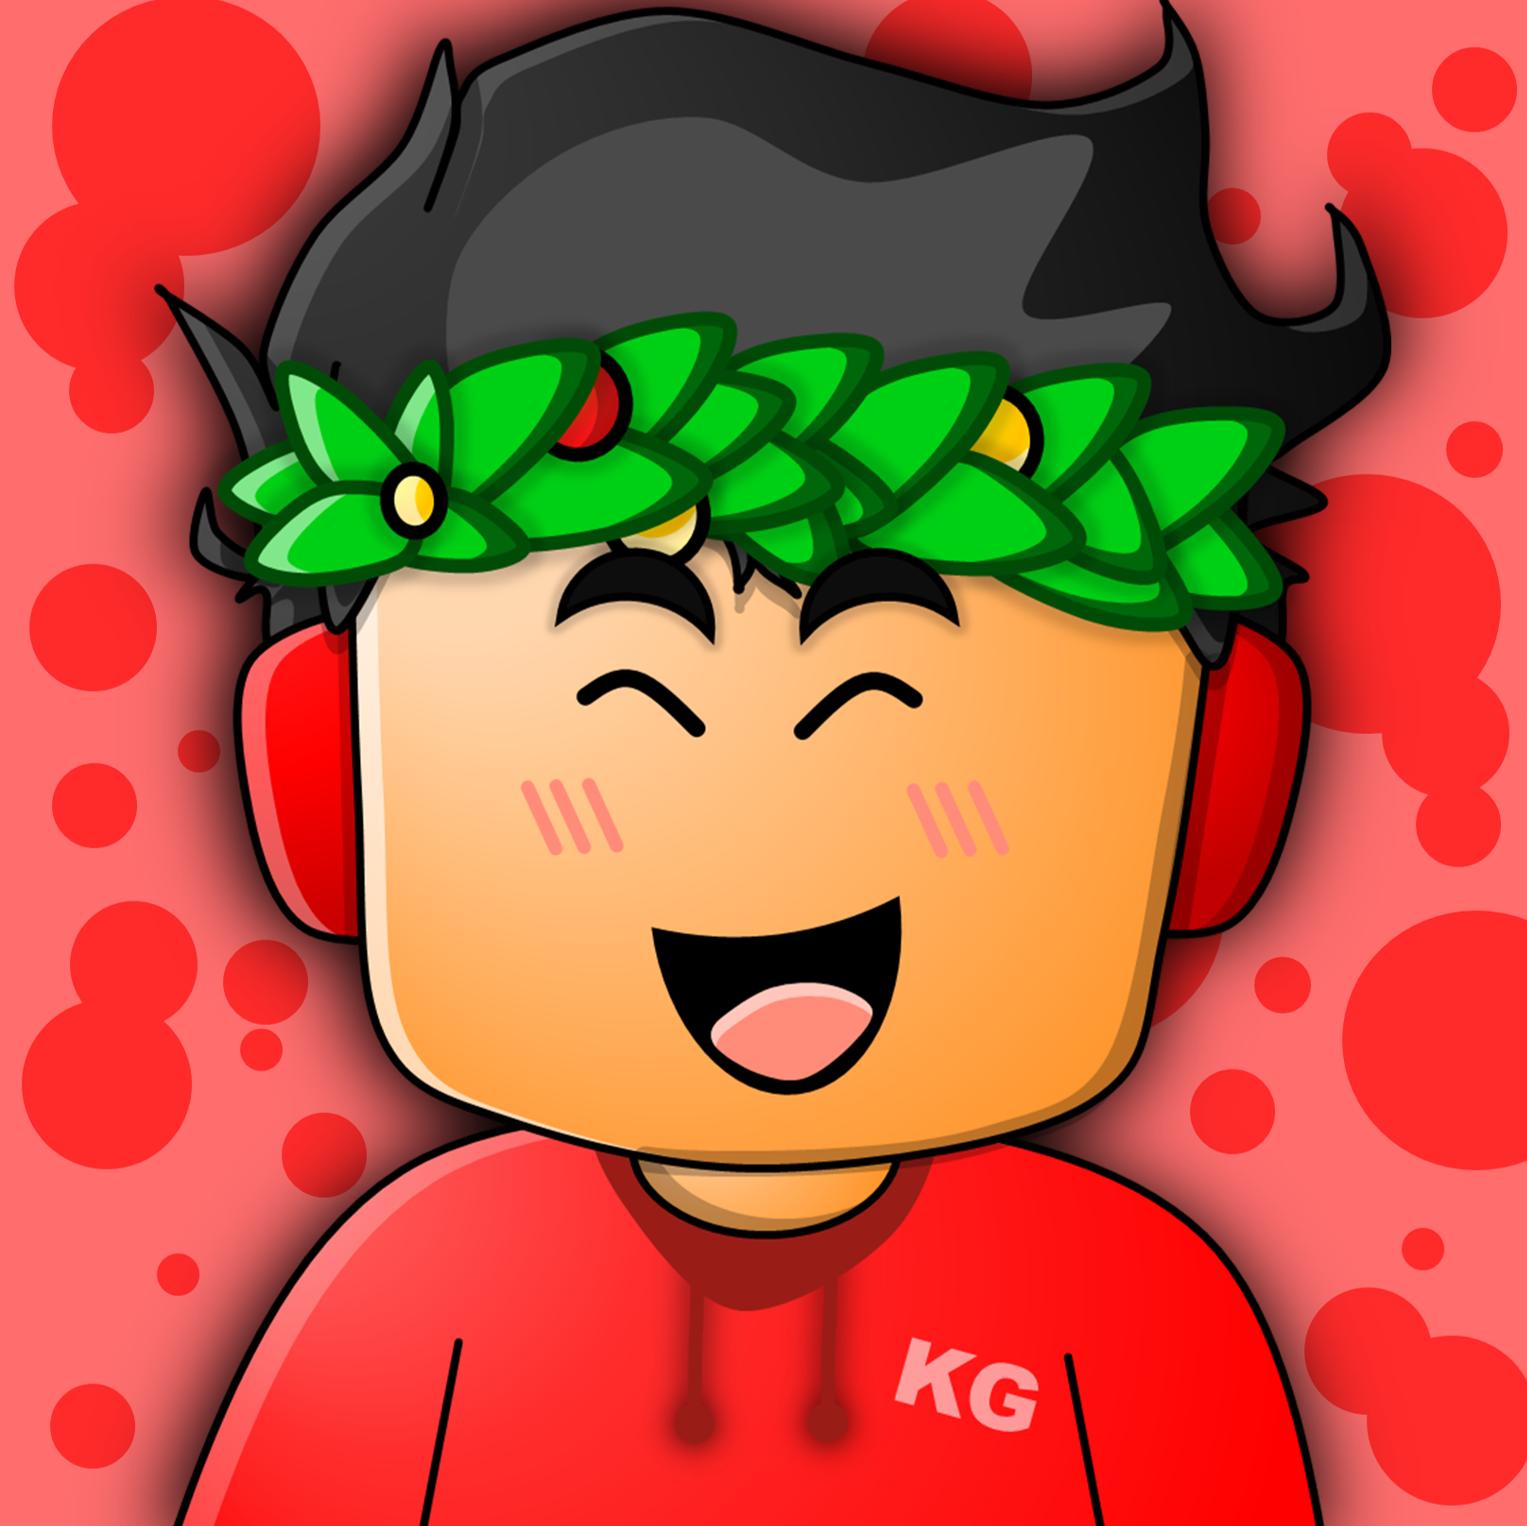 Darindh On Twitter Commission For Killerguytweets Roblox Robloxart Robloxgfx - roblox on twitter lights camera action at gratedgaming